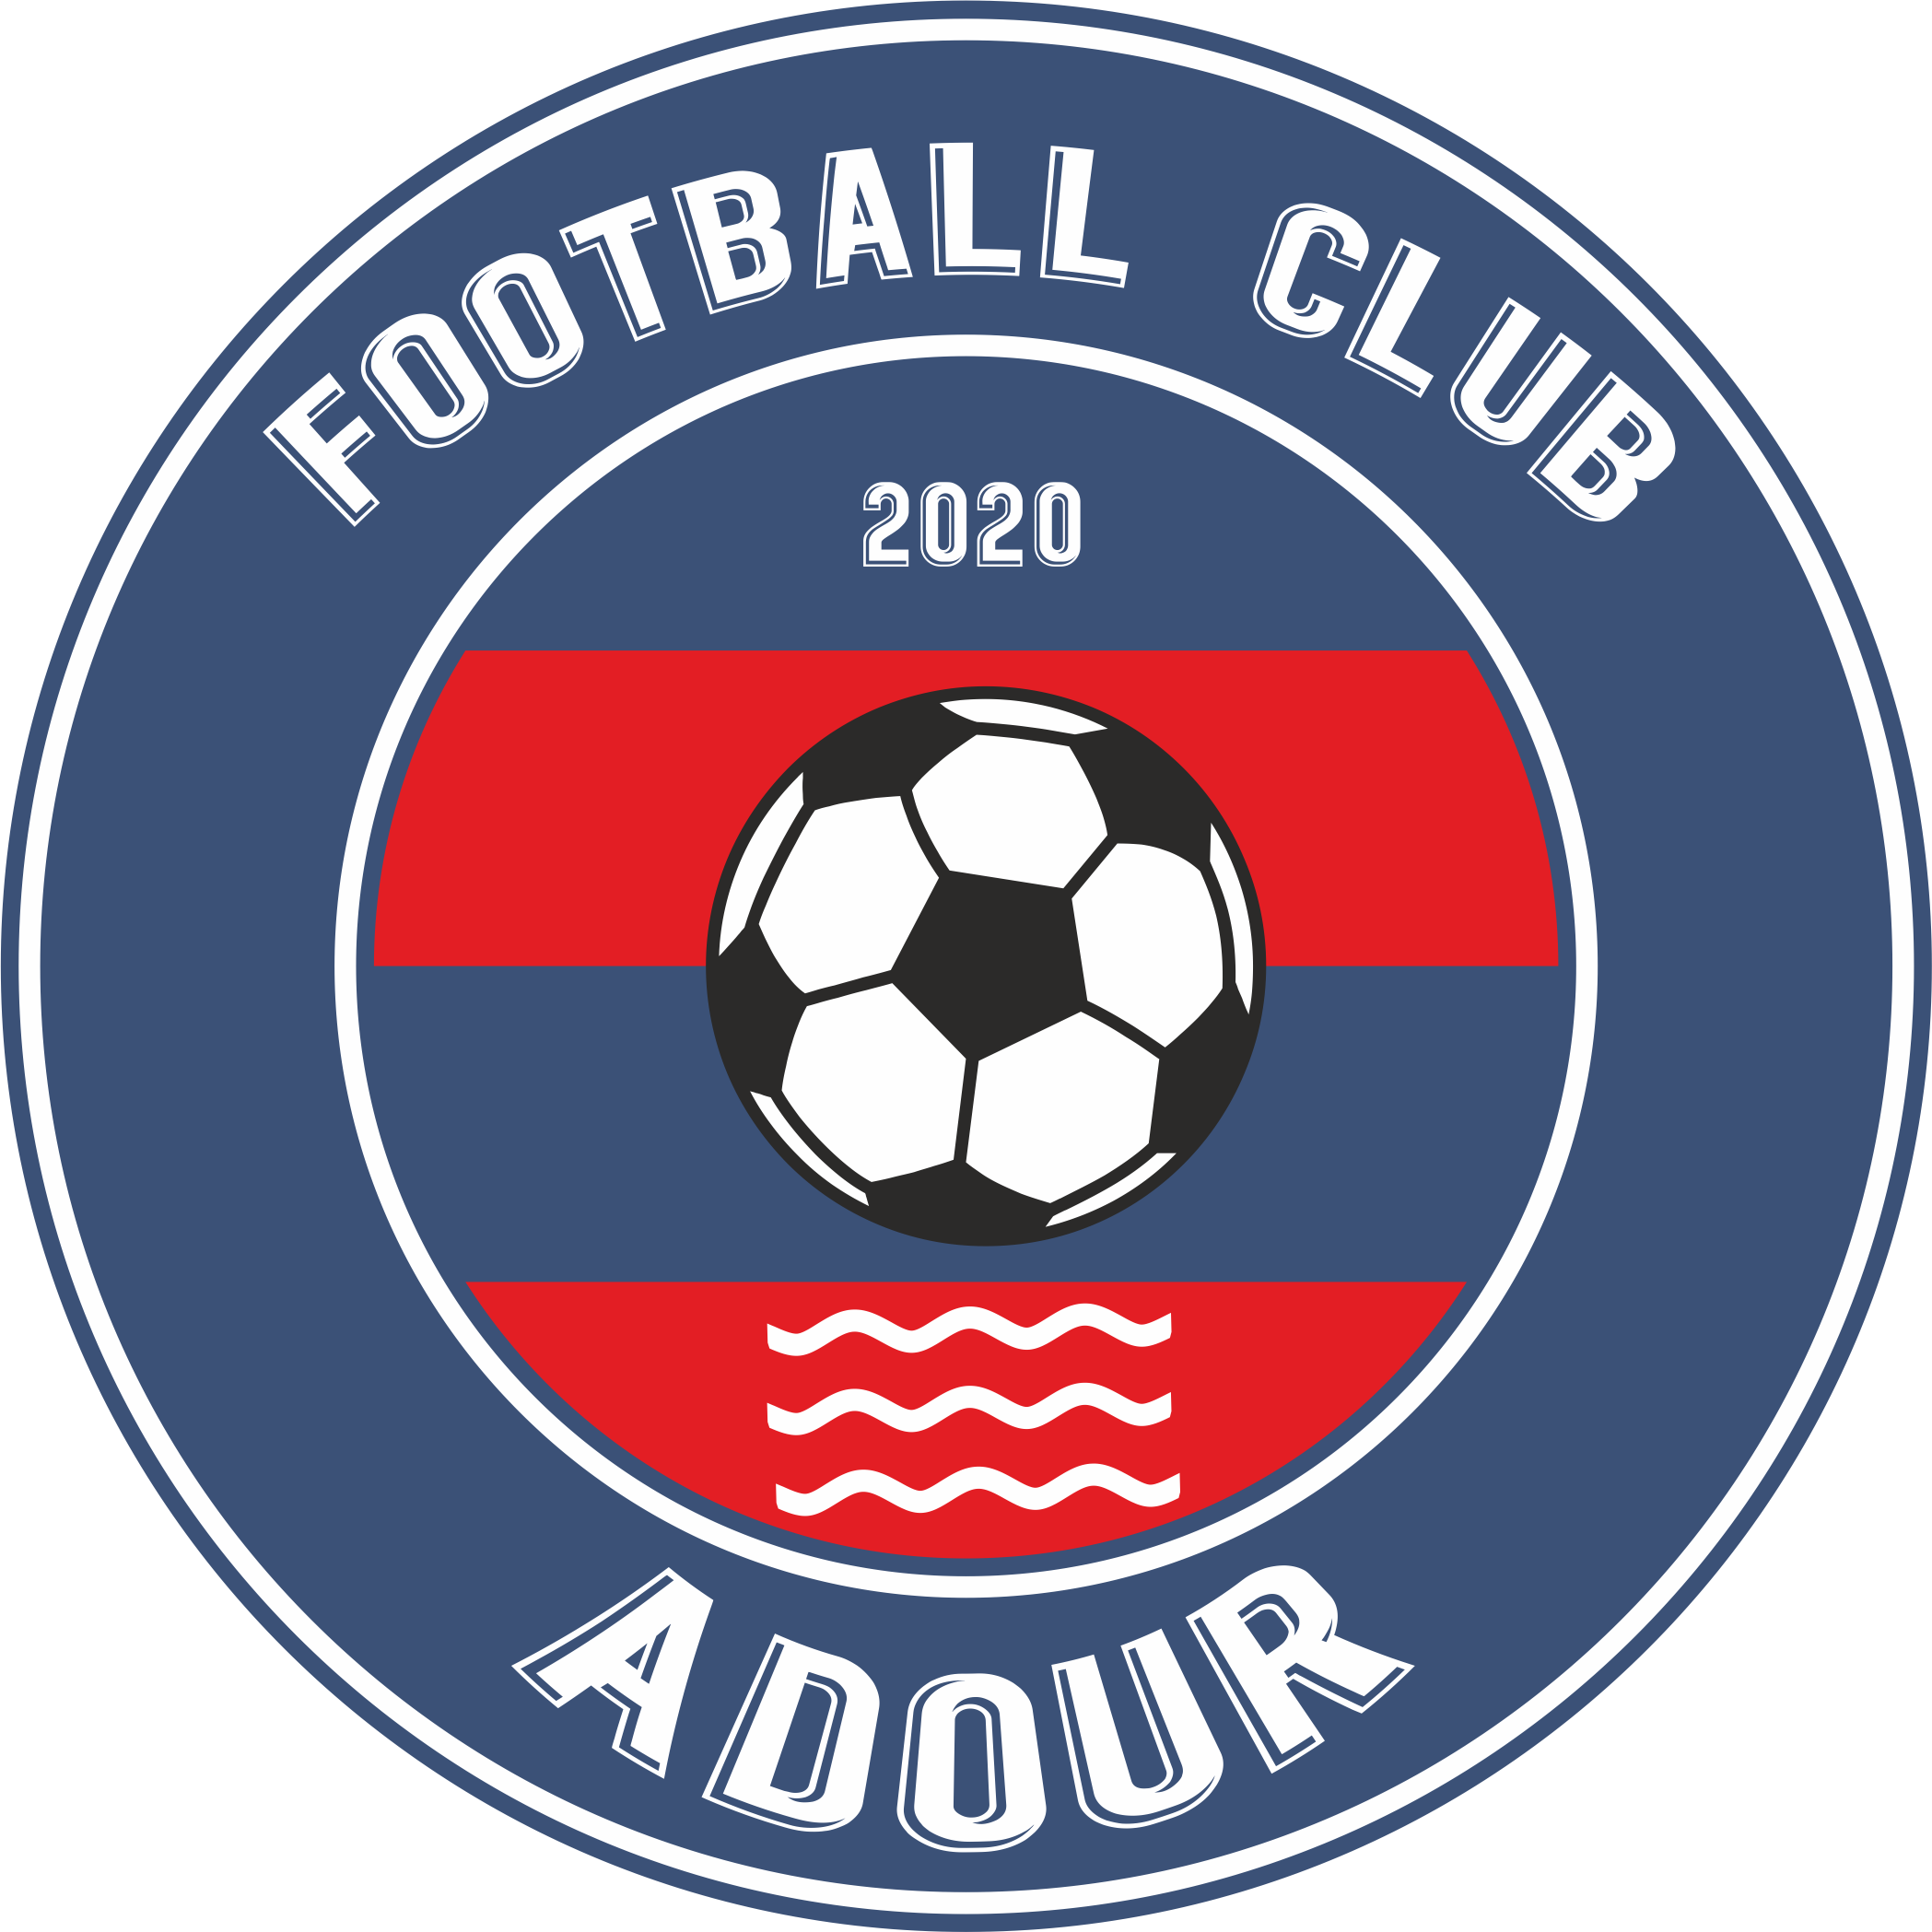 FOOTBALL CLUB ADOUR Title Image